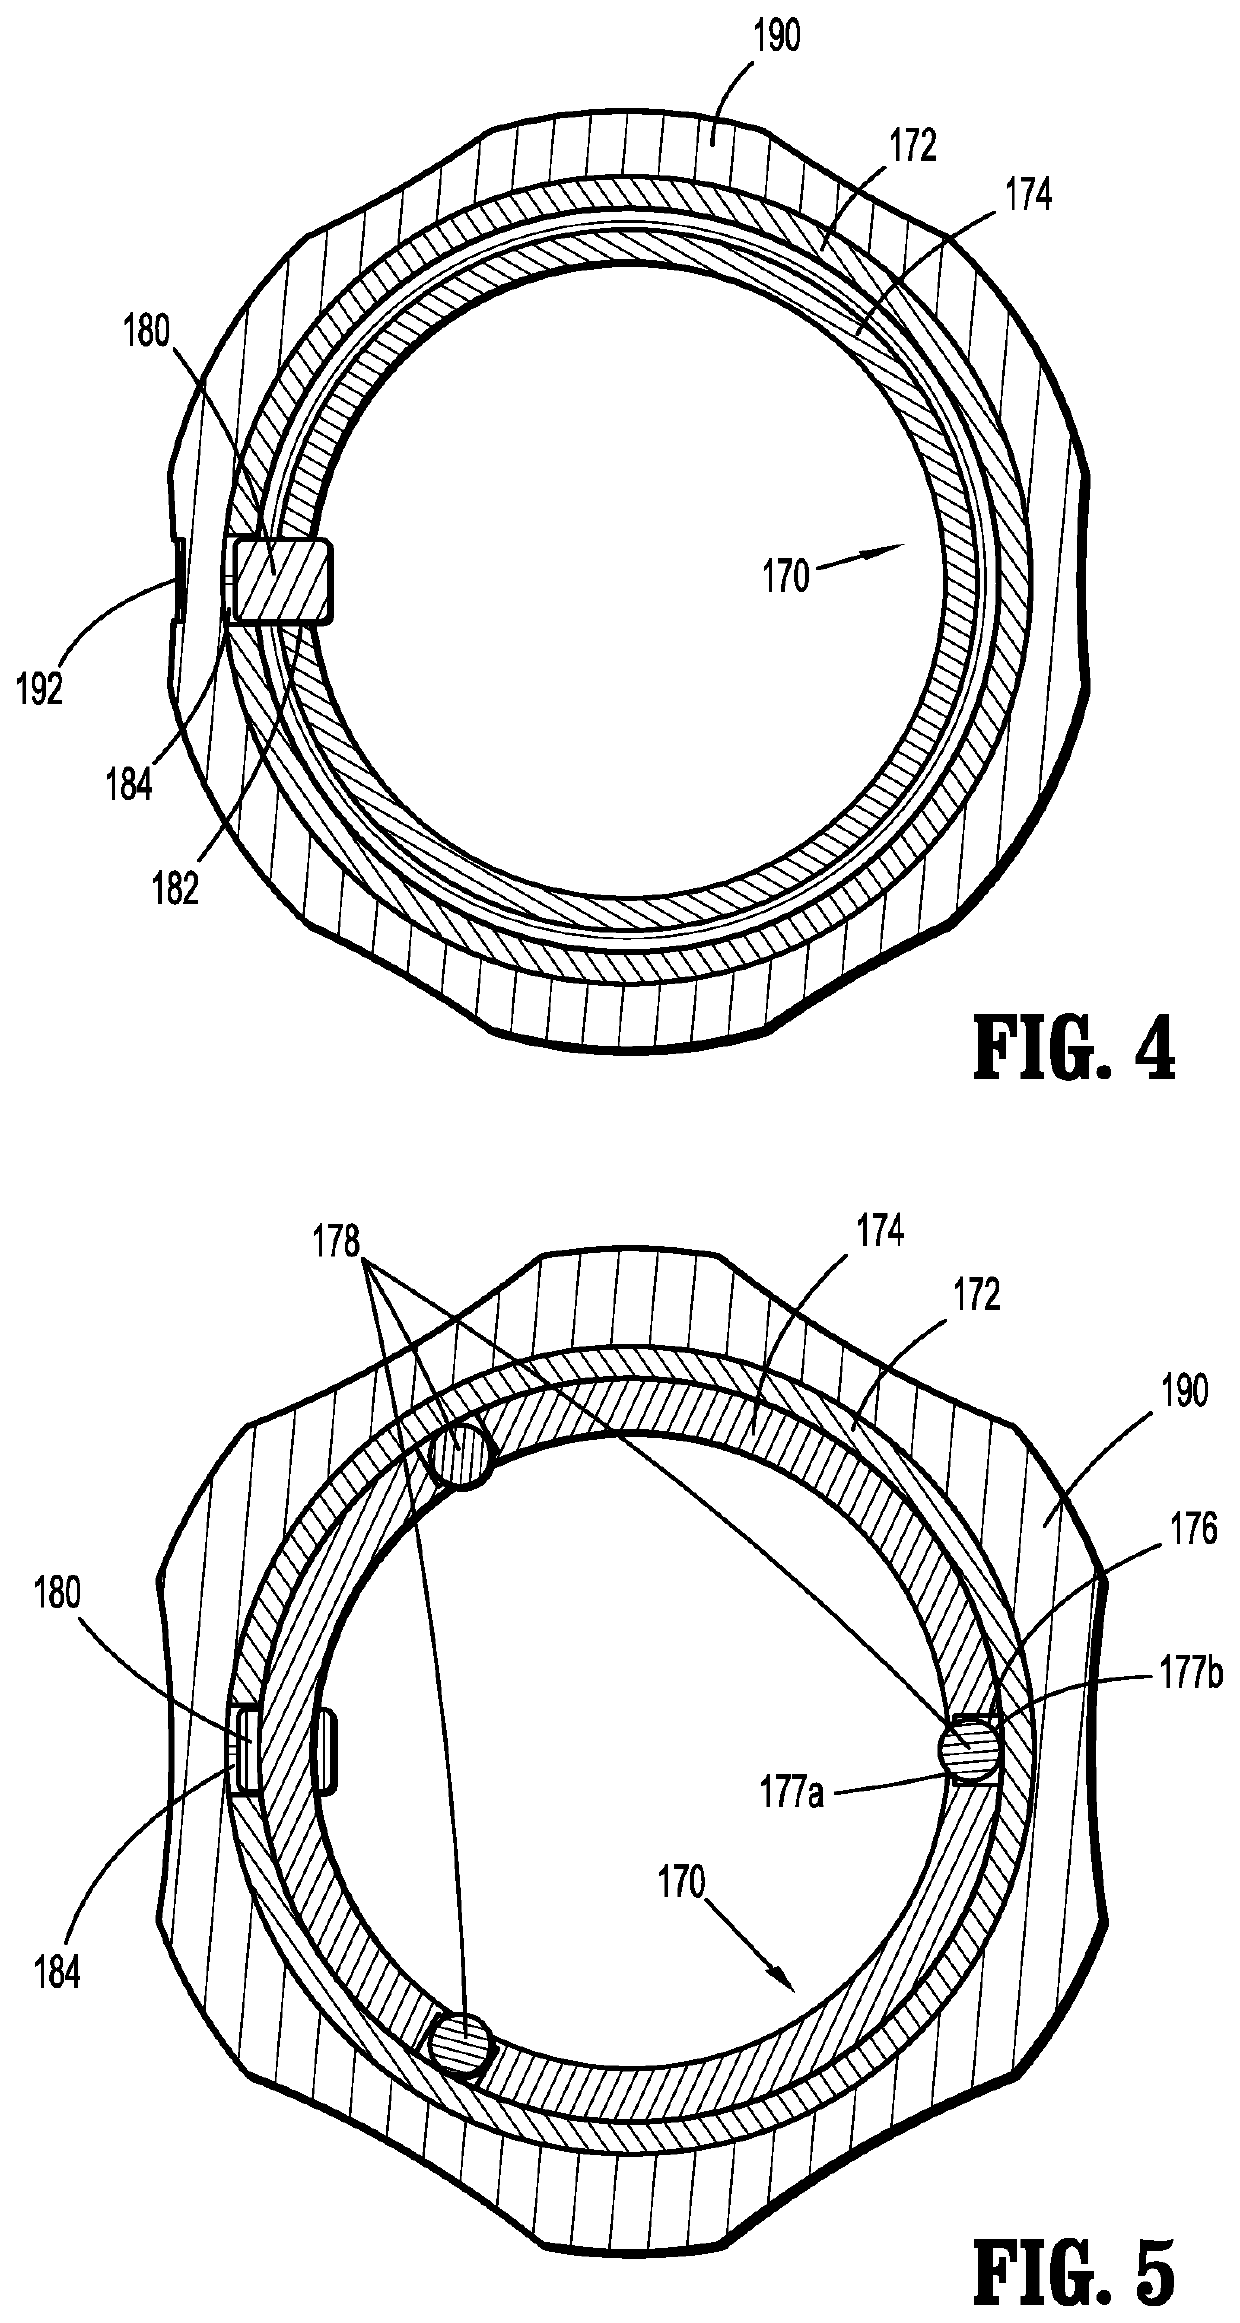 Endoscopic surgical instrument and handle assemblies for use therewith